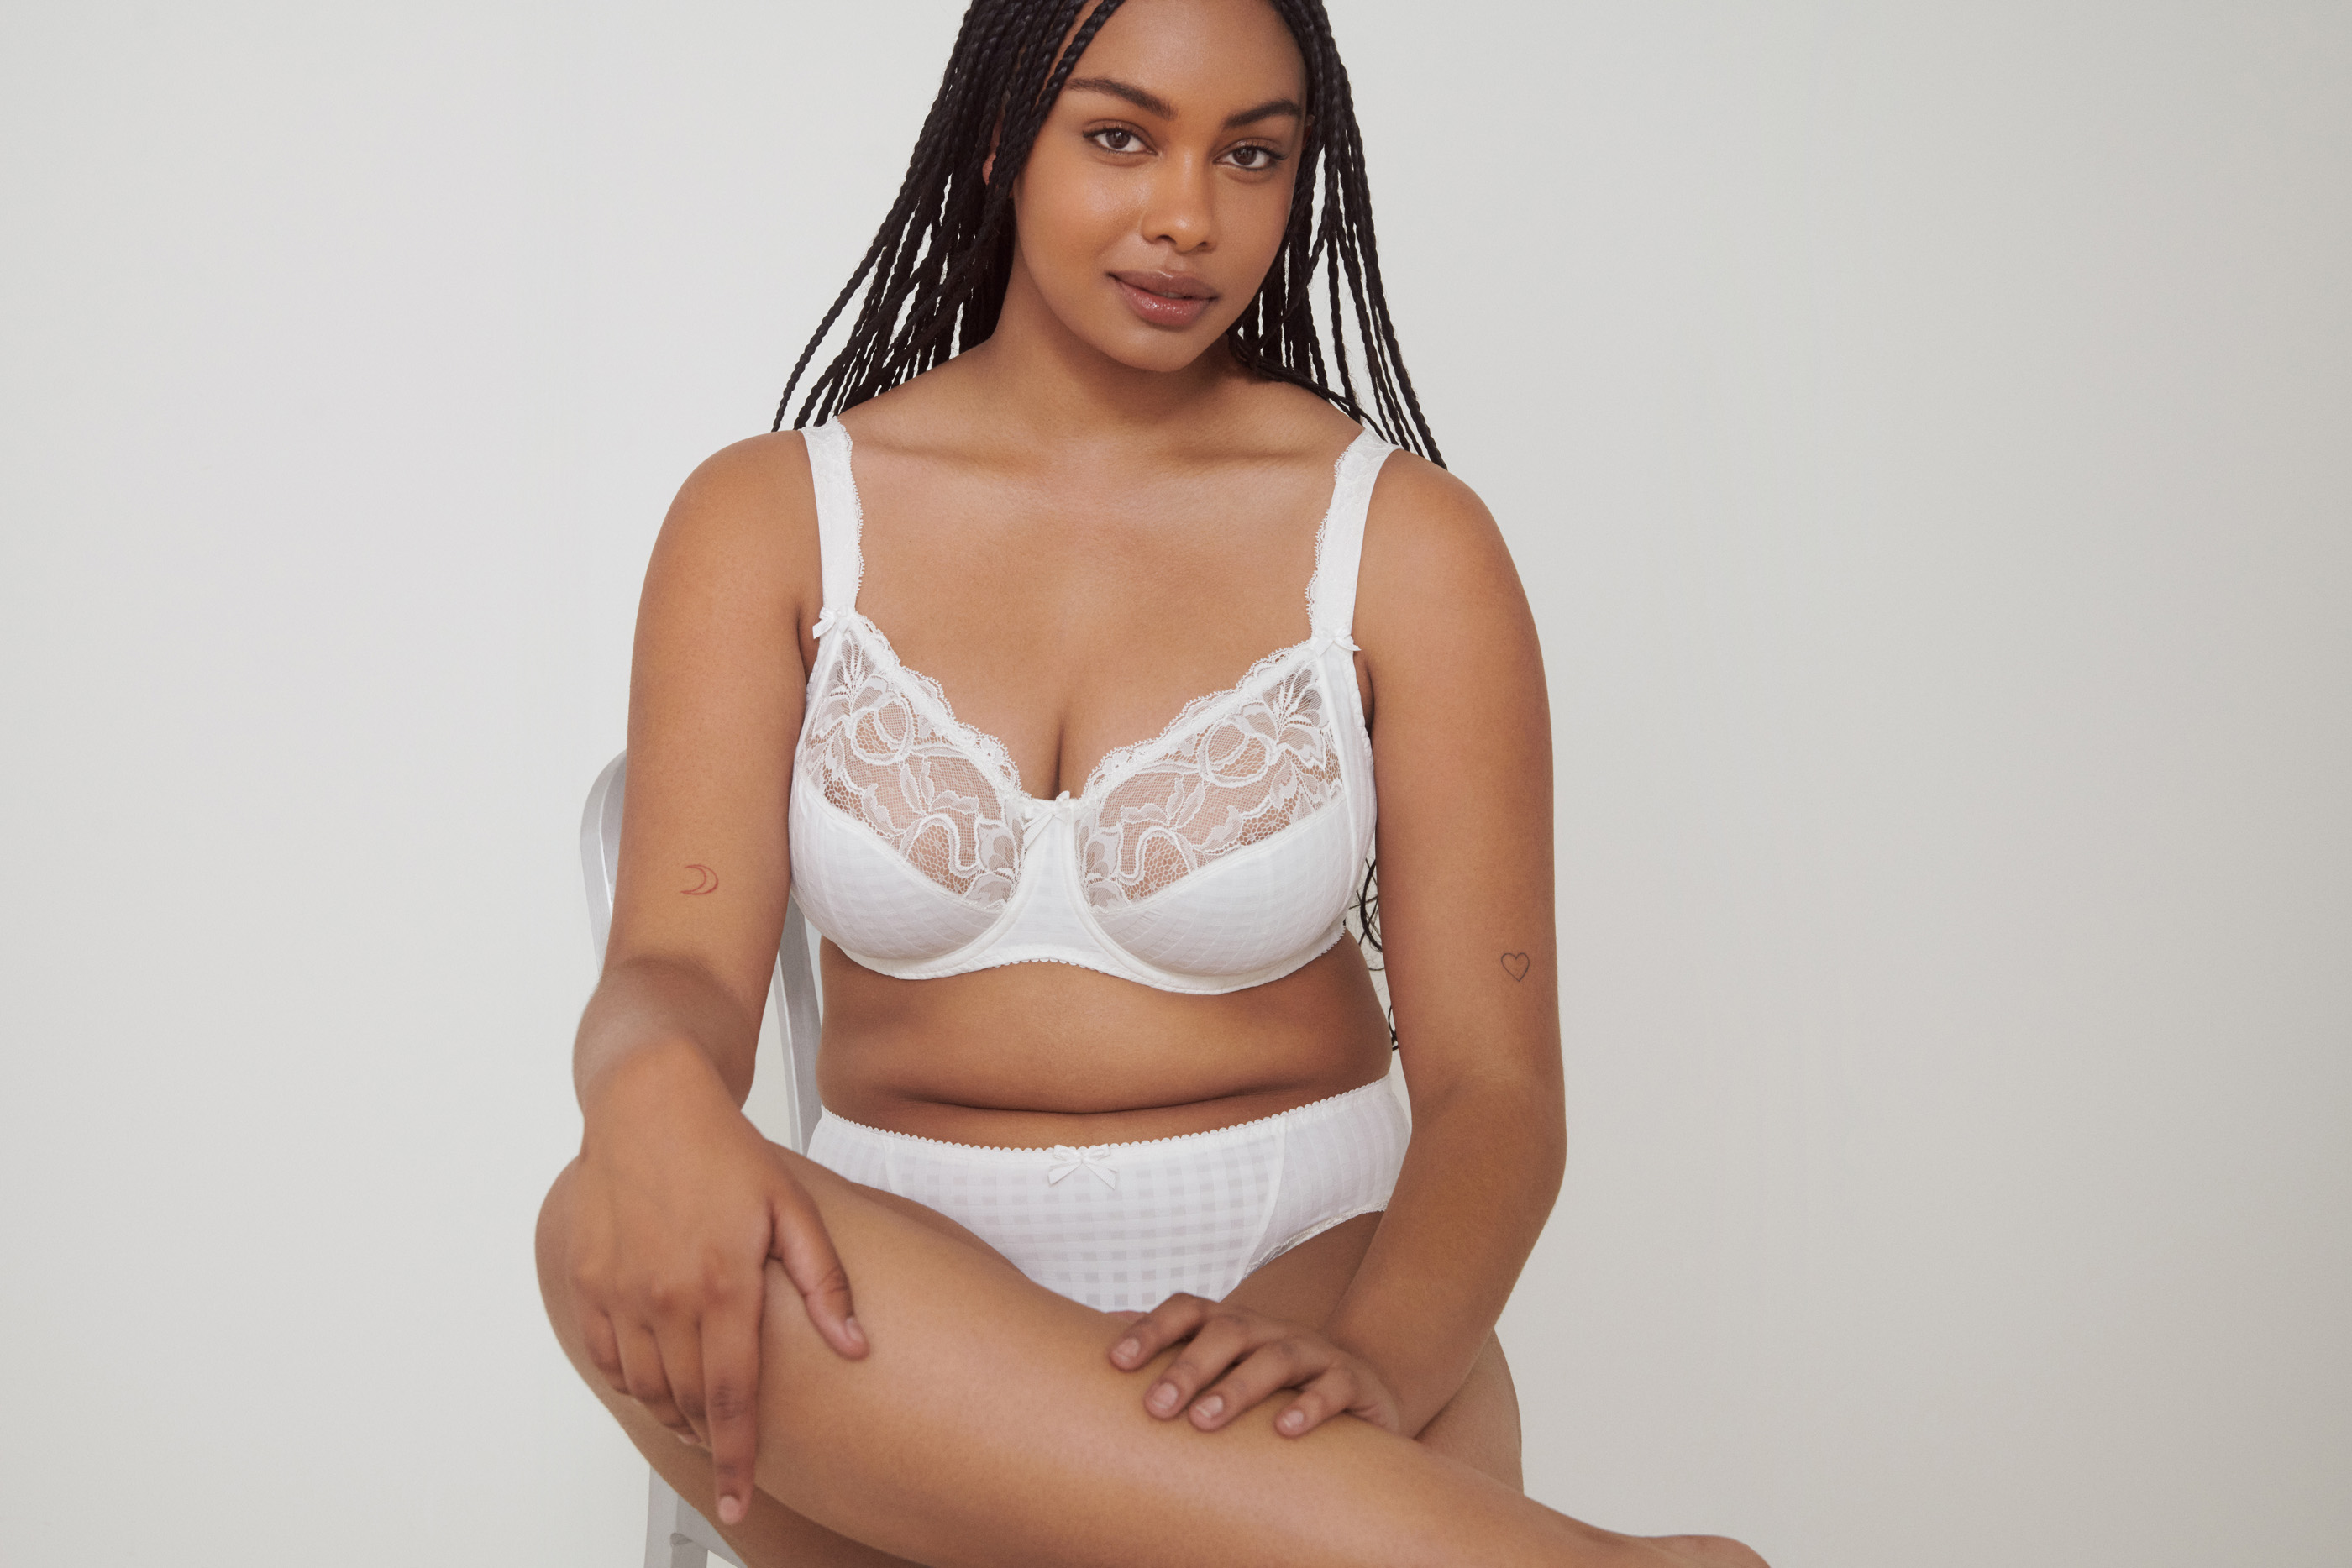 Answers to Frequently Asked Questions on Wearing an Underwire Bra